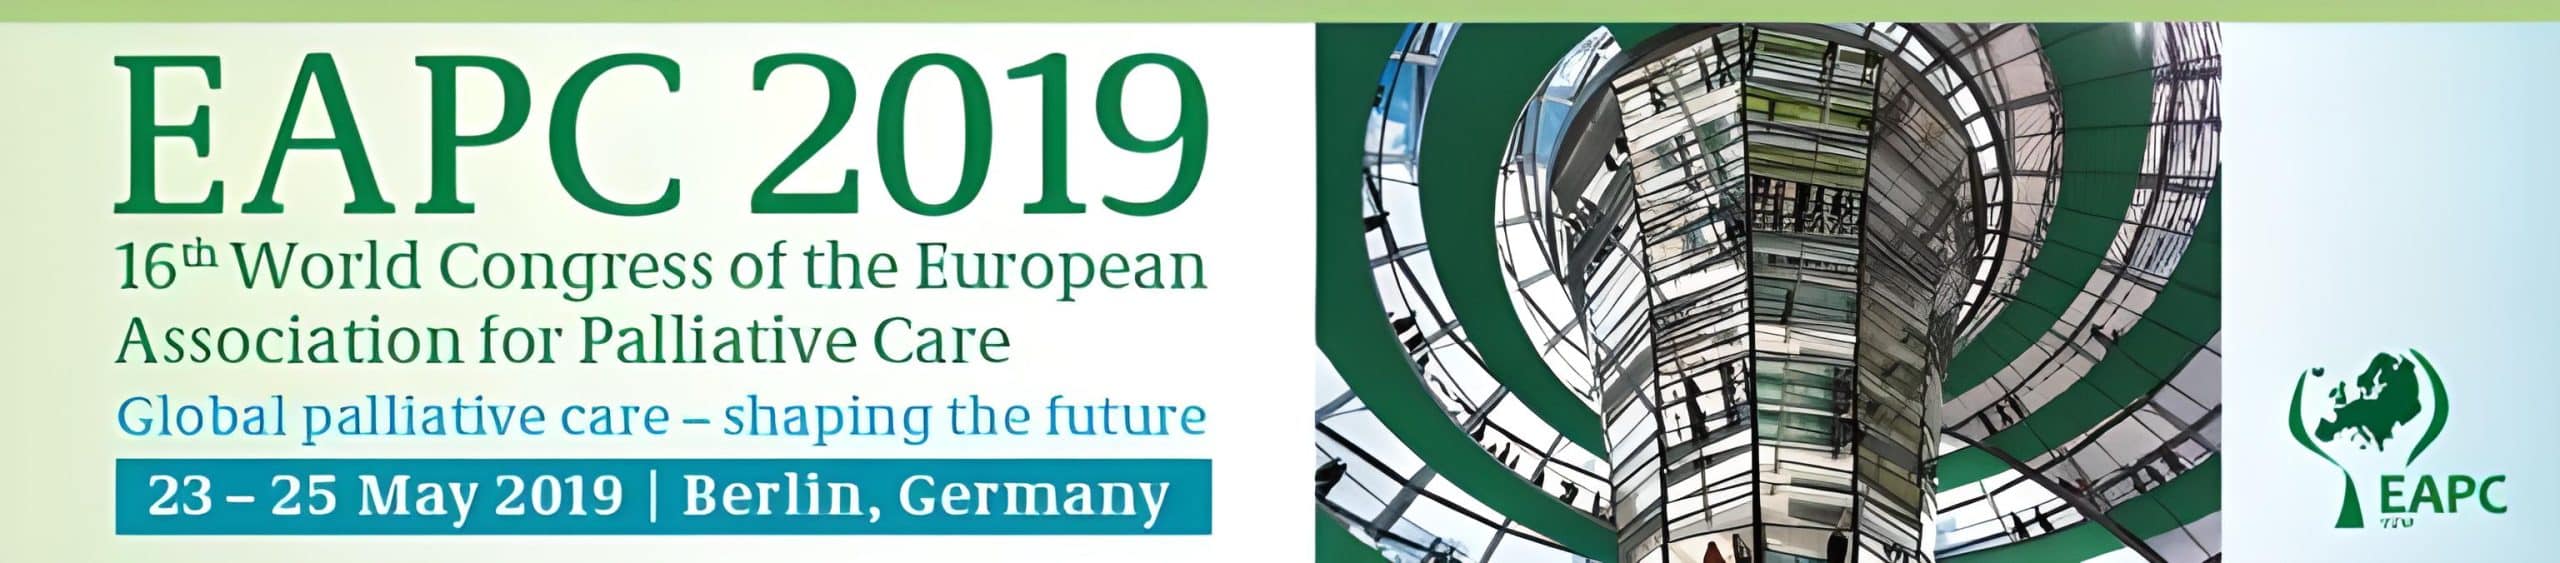 banner 16th world congress of the EAPC global palliative care - shaping the future 23-25 May 2019 Berlin